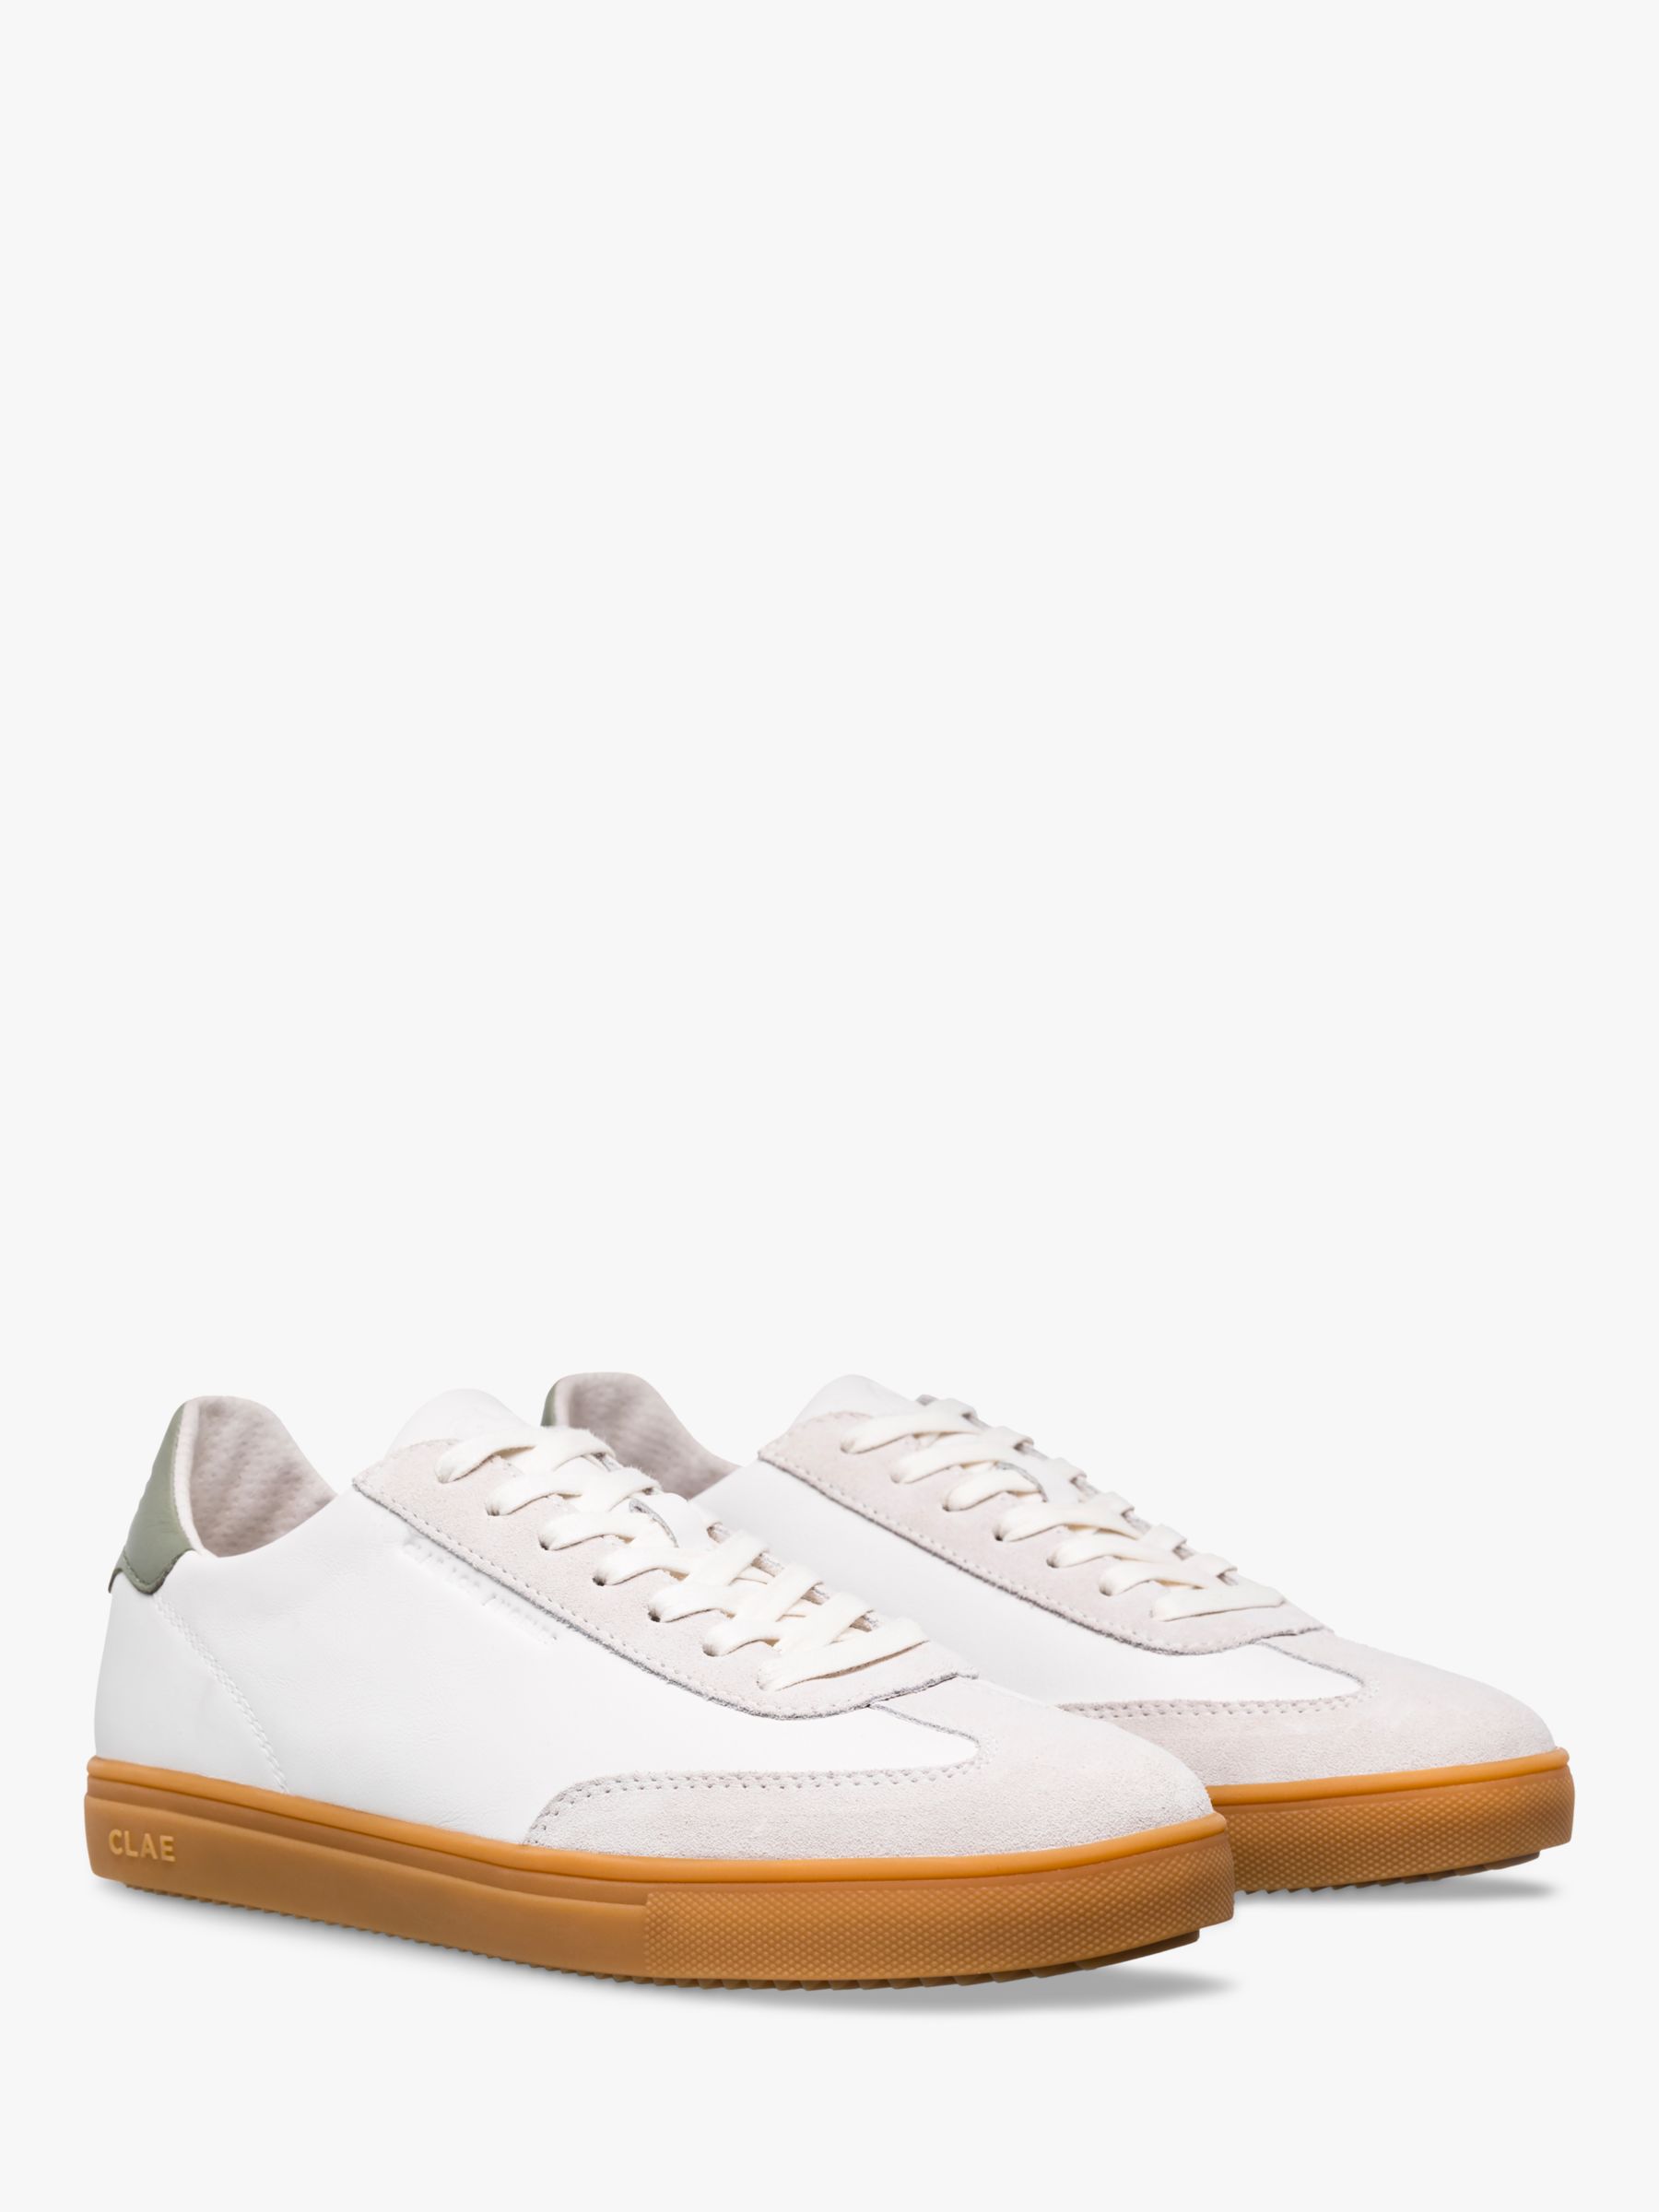 CLAE Deane Leather Low Top Trainers, White Tea Gum, 9